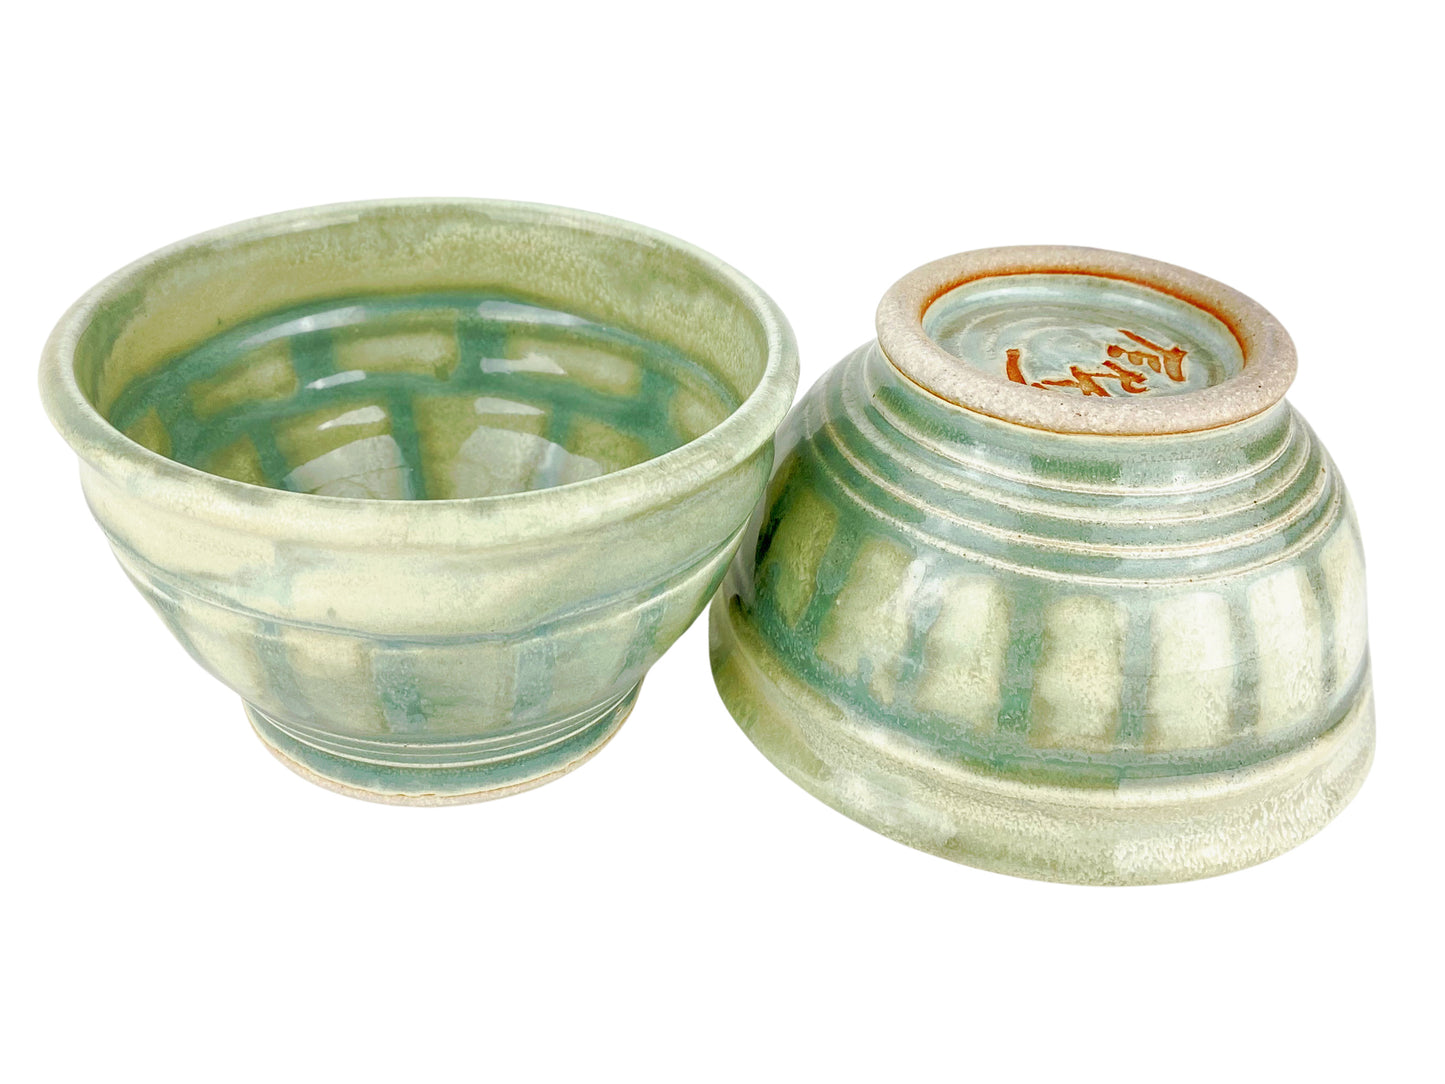 Cereal or Soup Bowls, Pale Yellow Green with Grey Green Accents